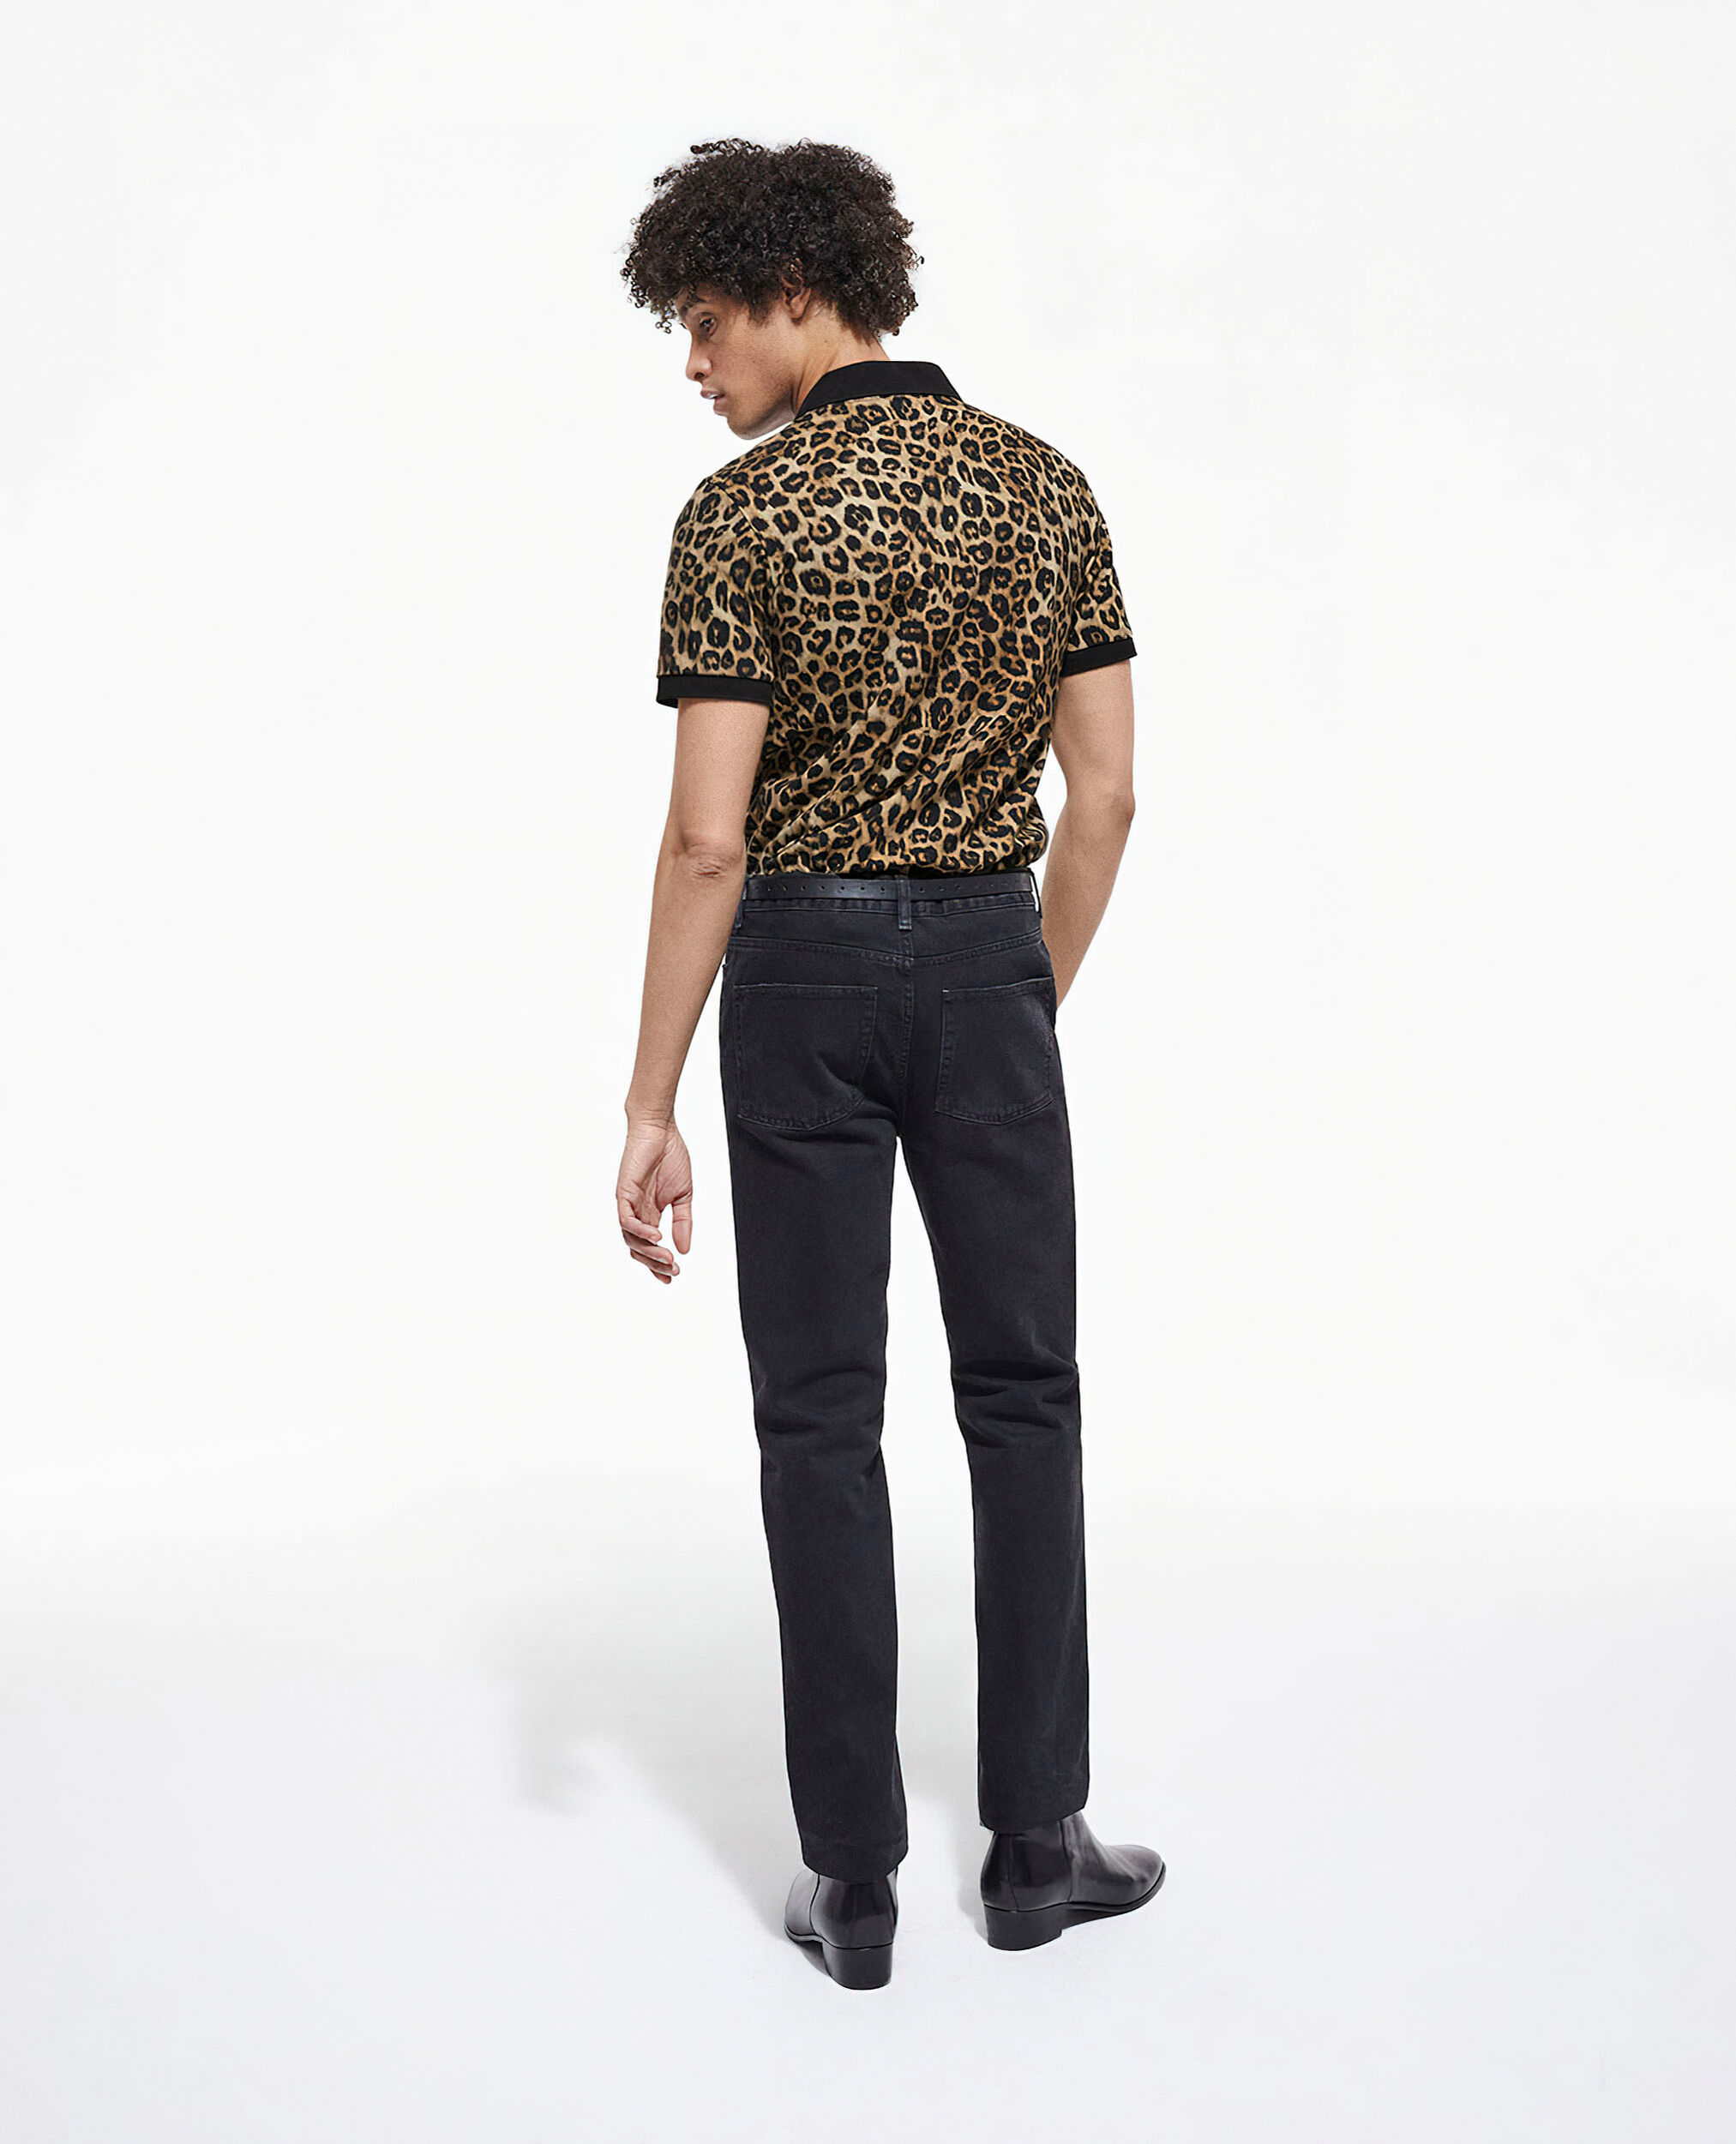 Leopard print polo, LEOPARD, hi-res image number null